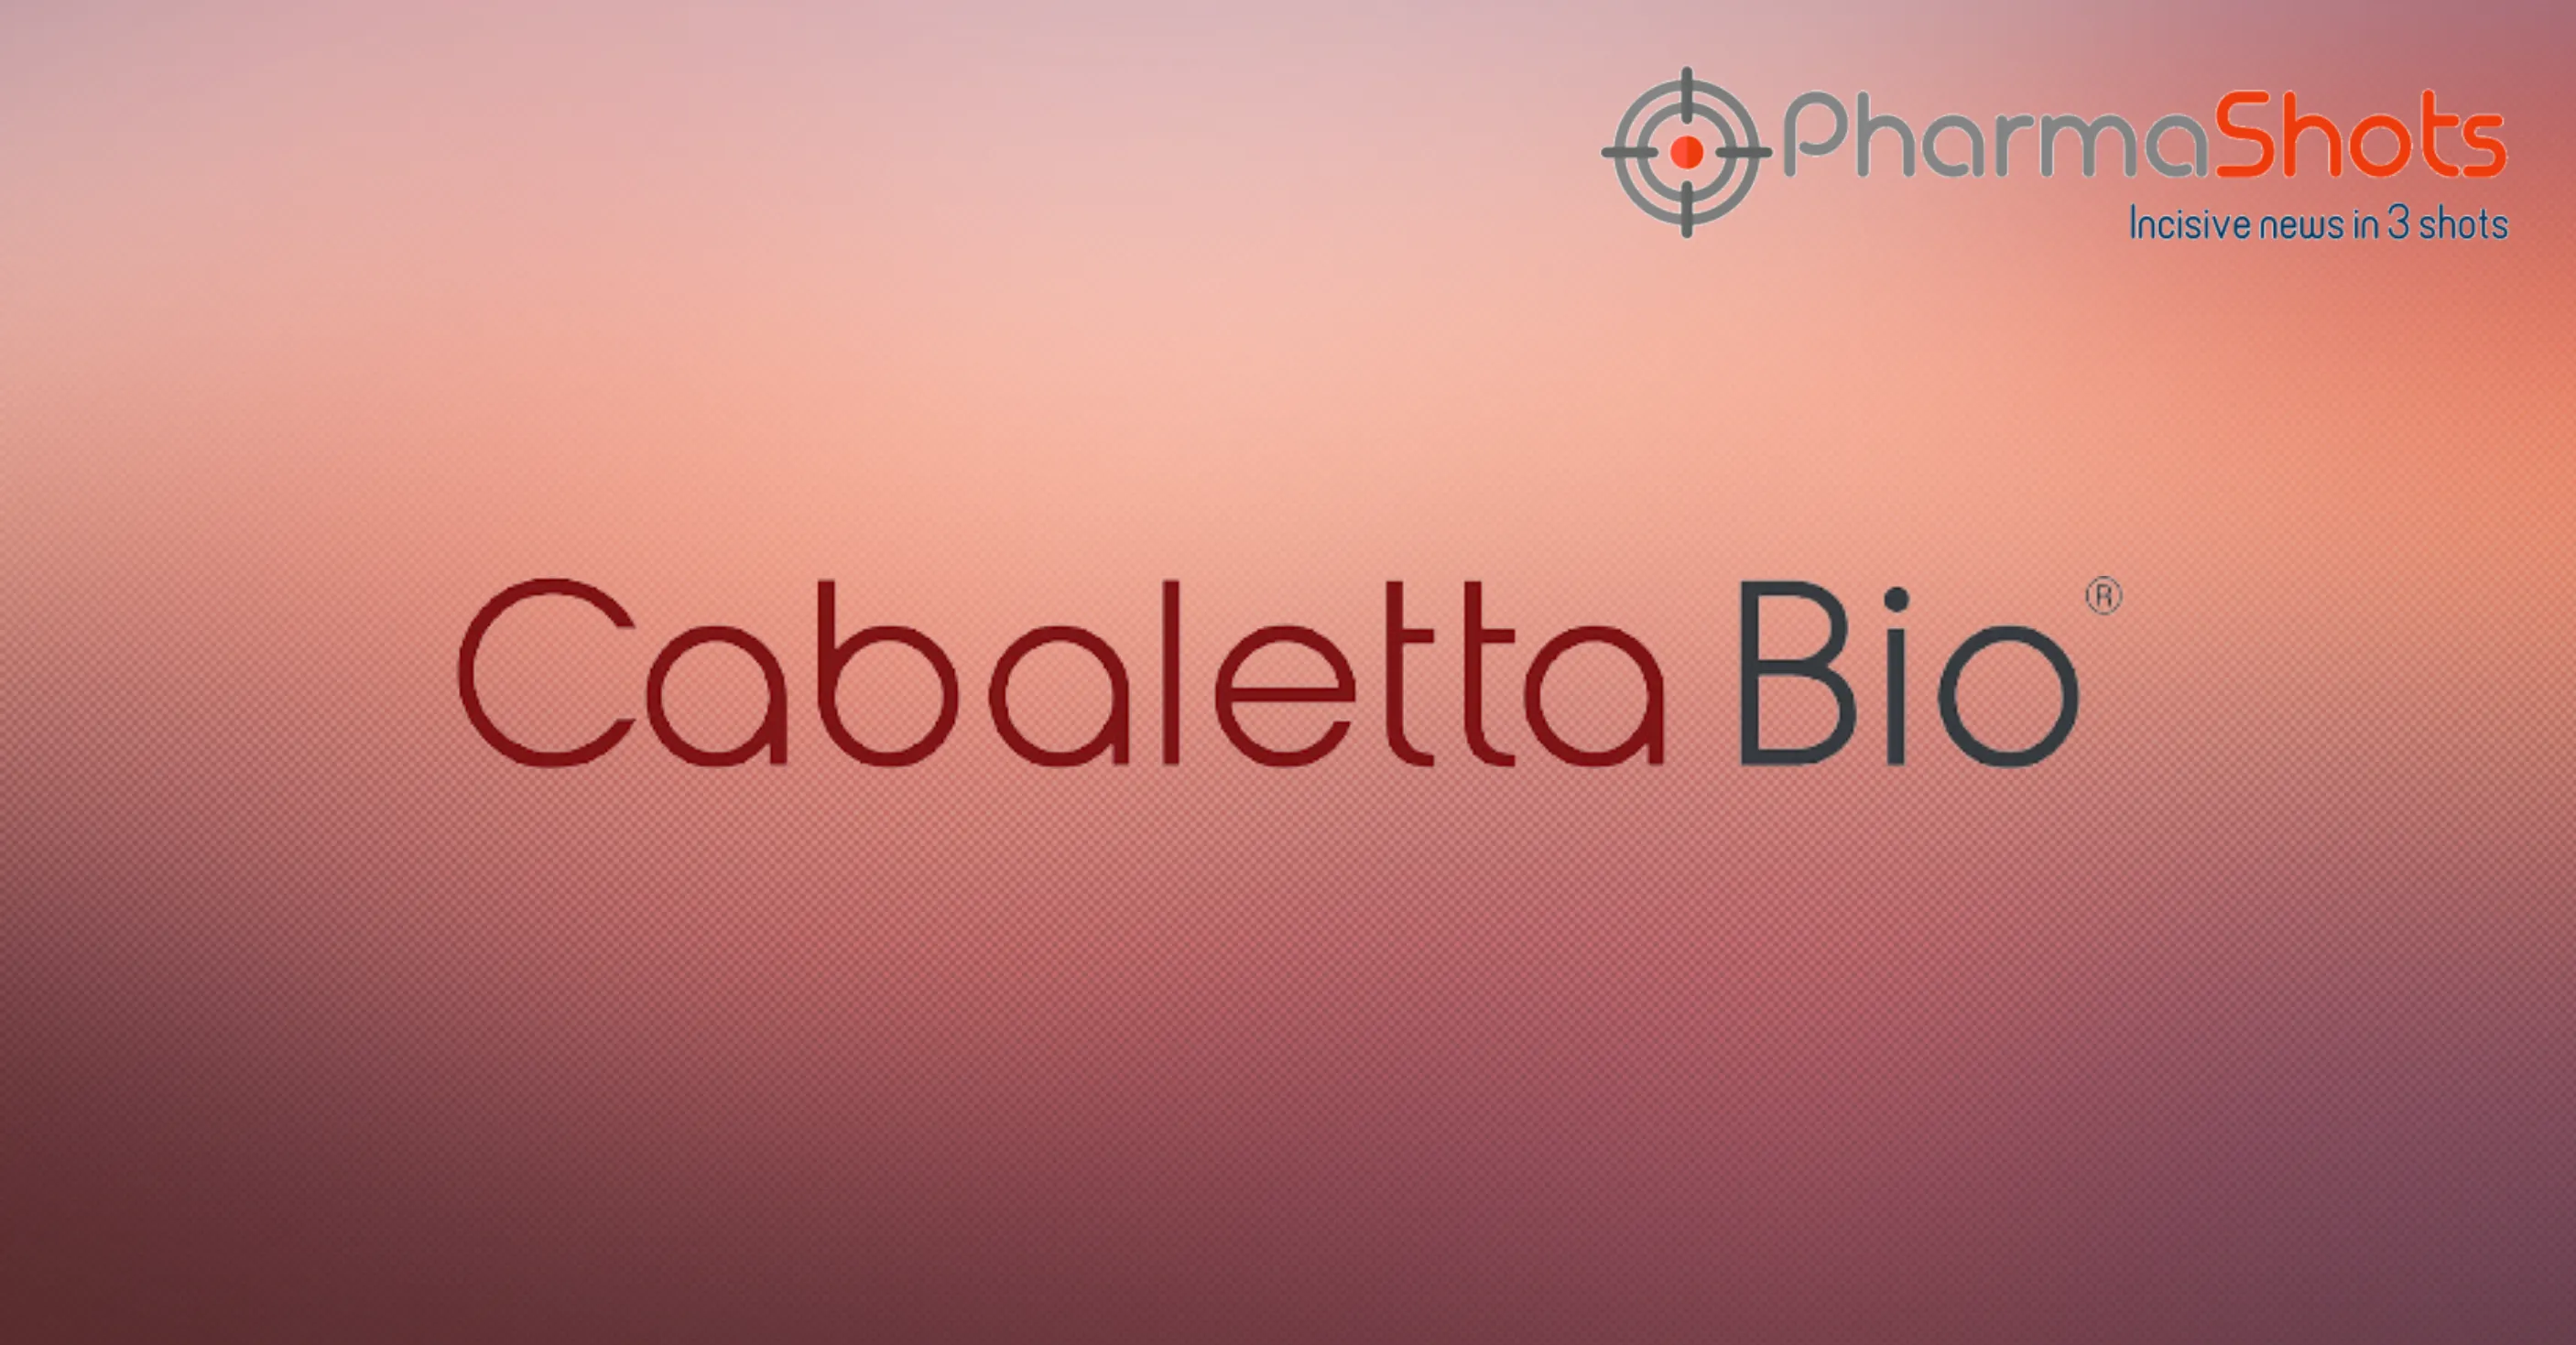 Cabaletta Bio’s CABA-201 Receives the US FDA’s Orphan Drug Designation to Treat Systemic Sclerosis